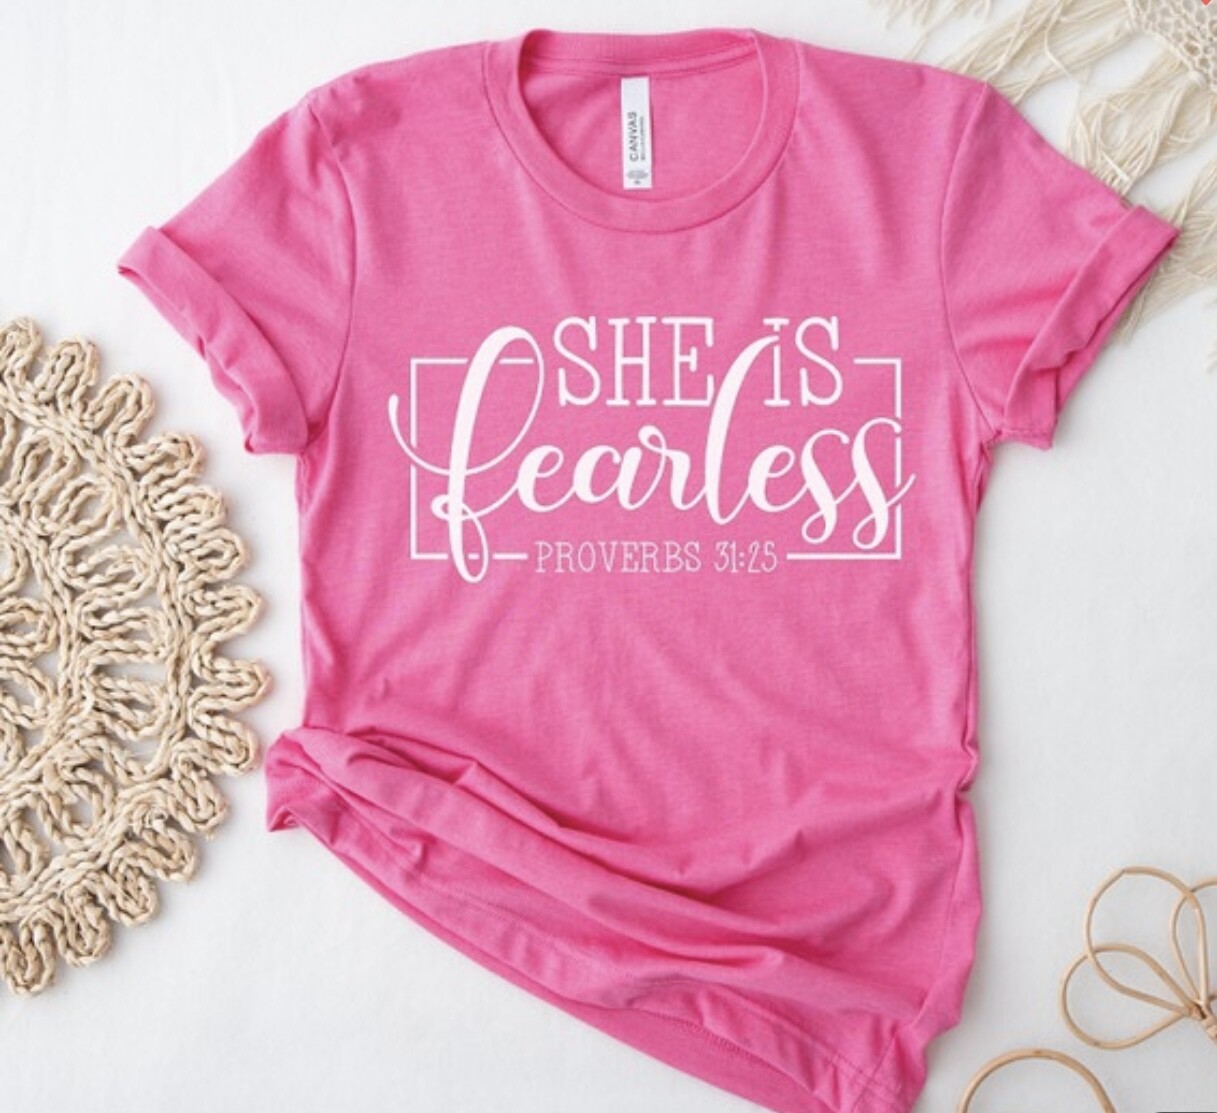 She Is Fearless Tee, Pink